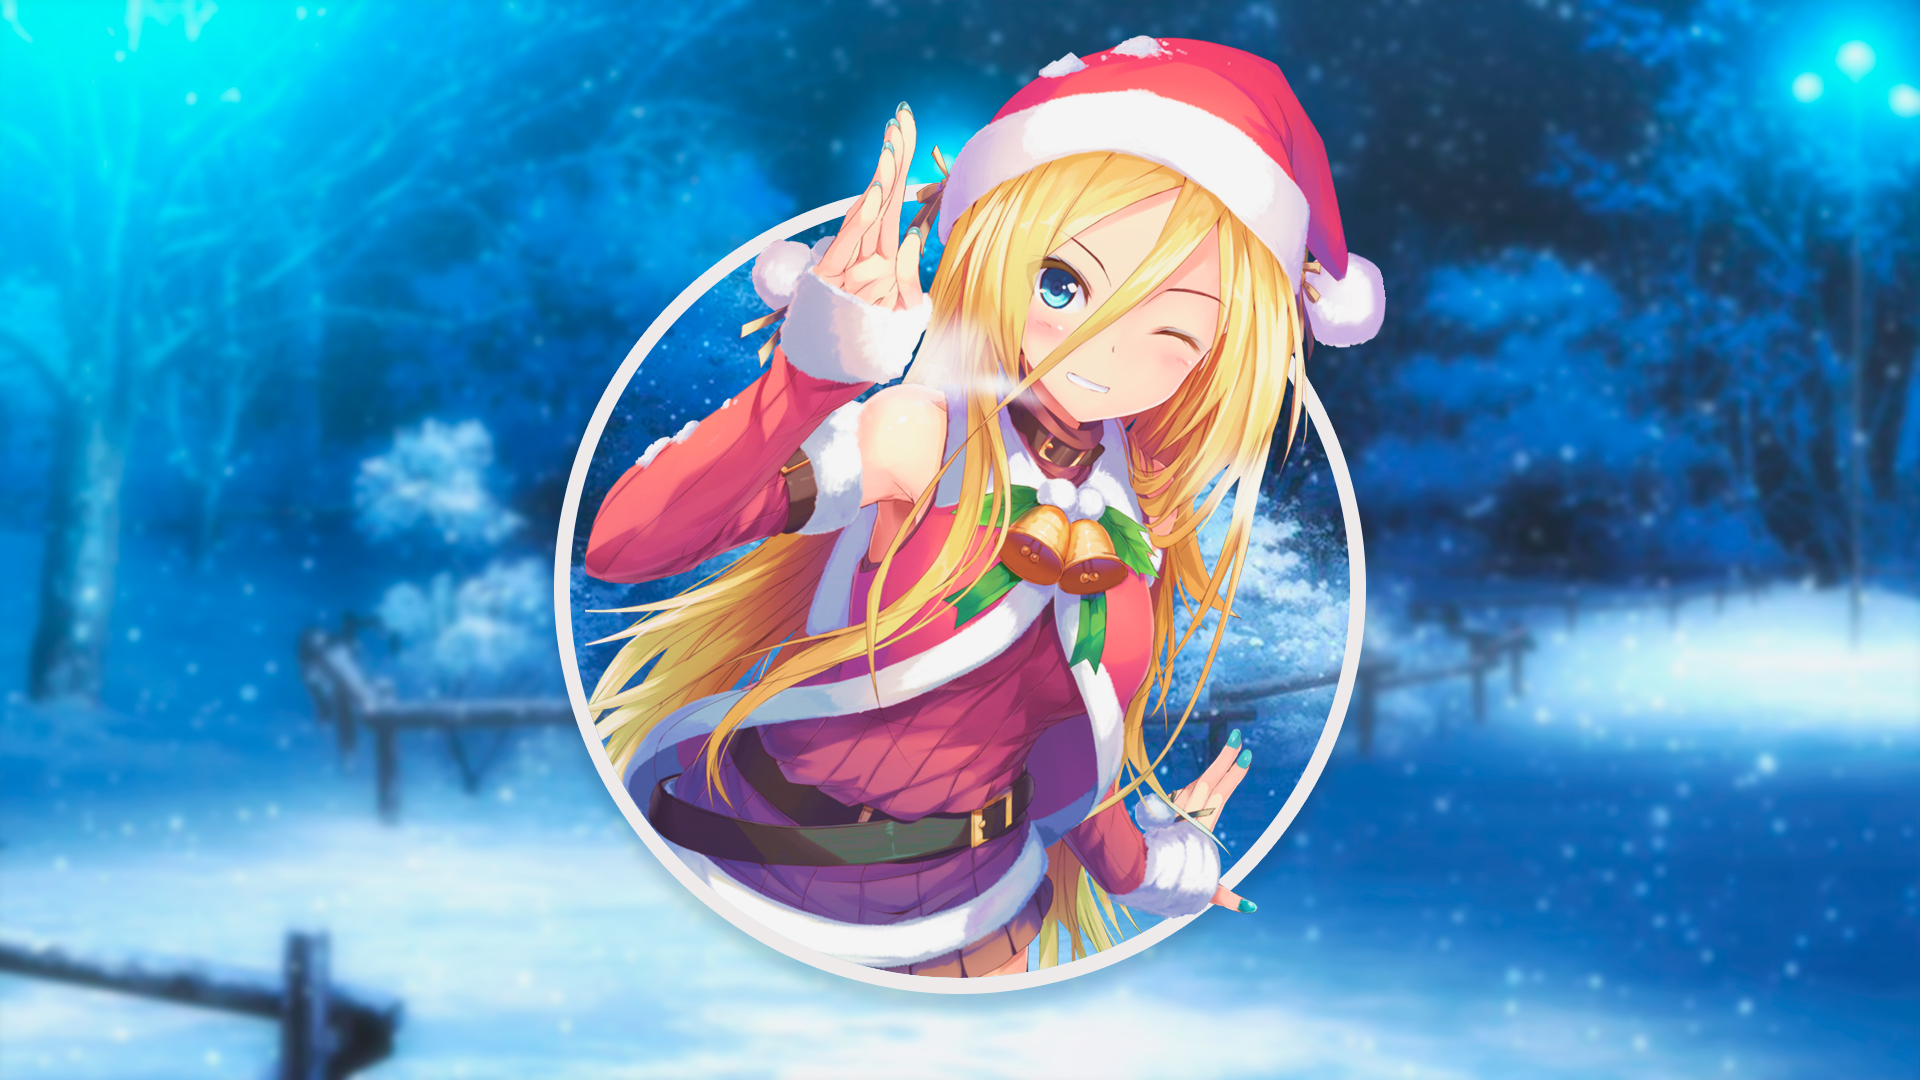 Anime 1920x1080 blonde Christmas Christmas clothes blue eyes snow anime girls happy picture-in-picture